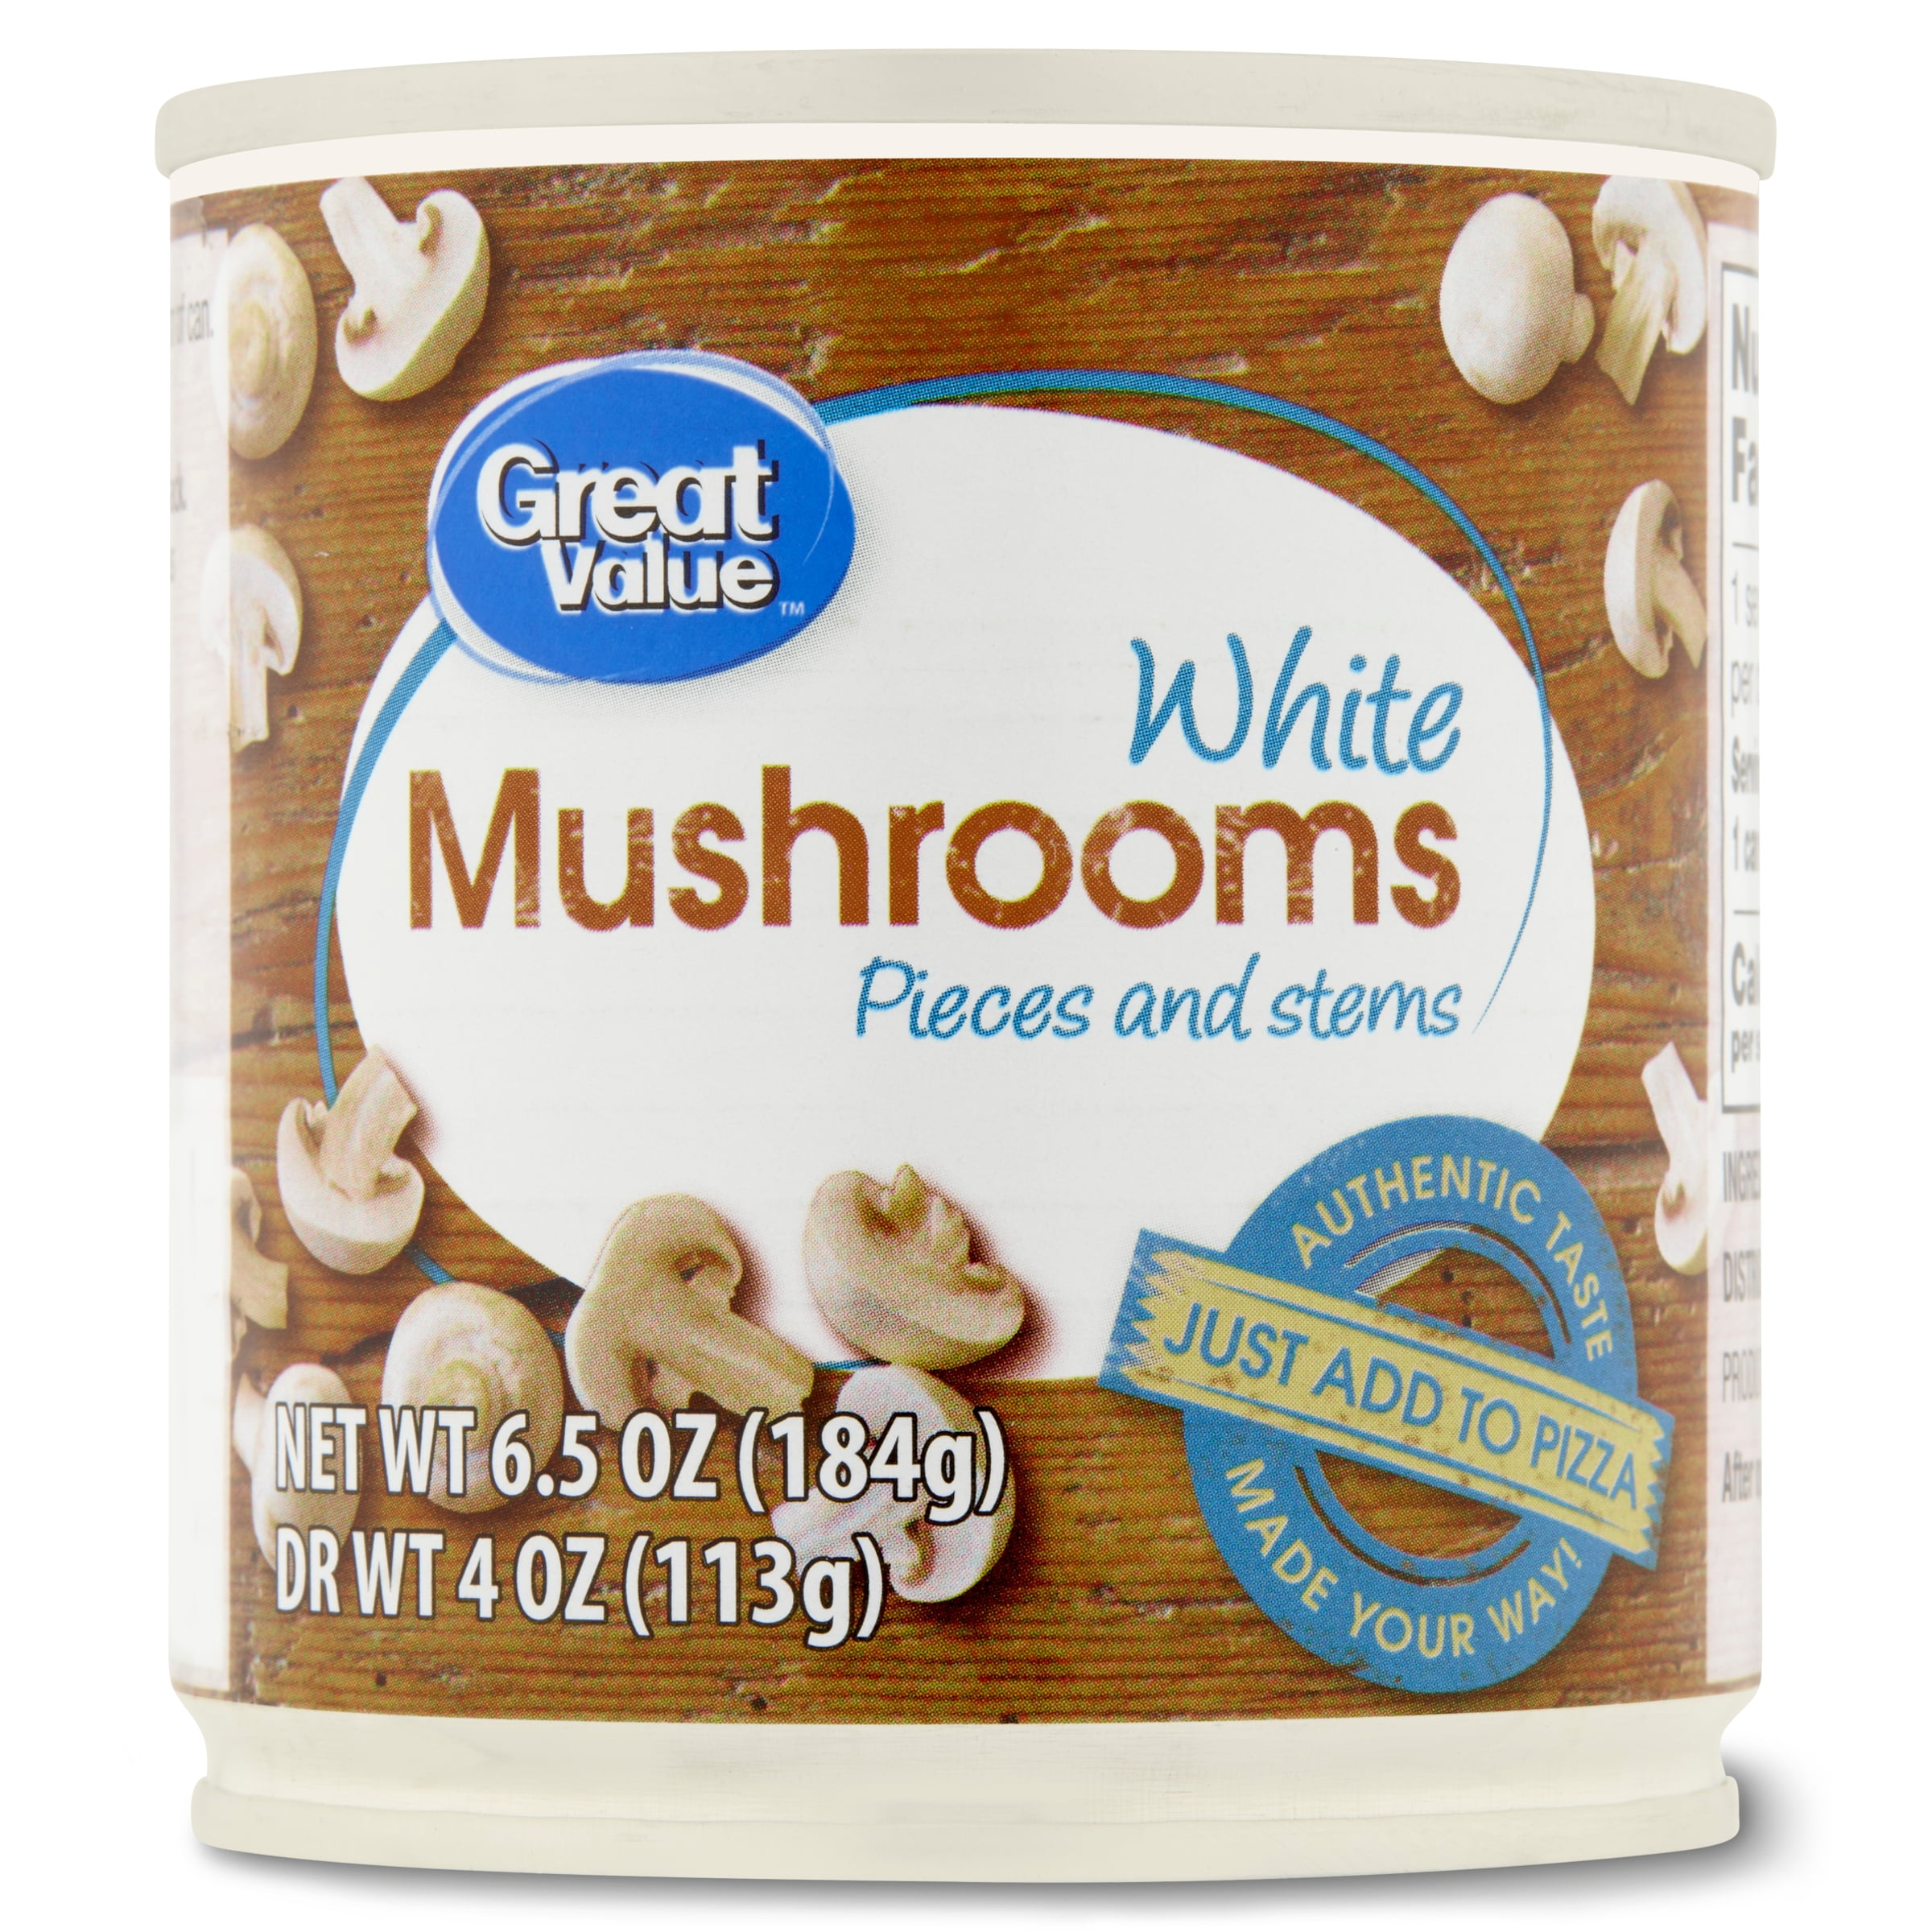 Great Value White Mushrooms Pieces and Stems, 6.5 oz